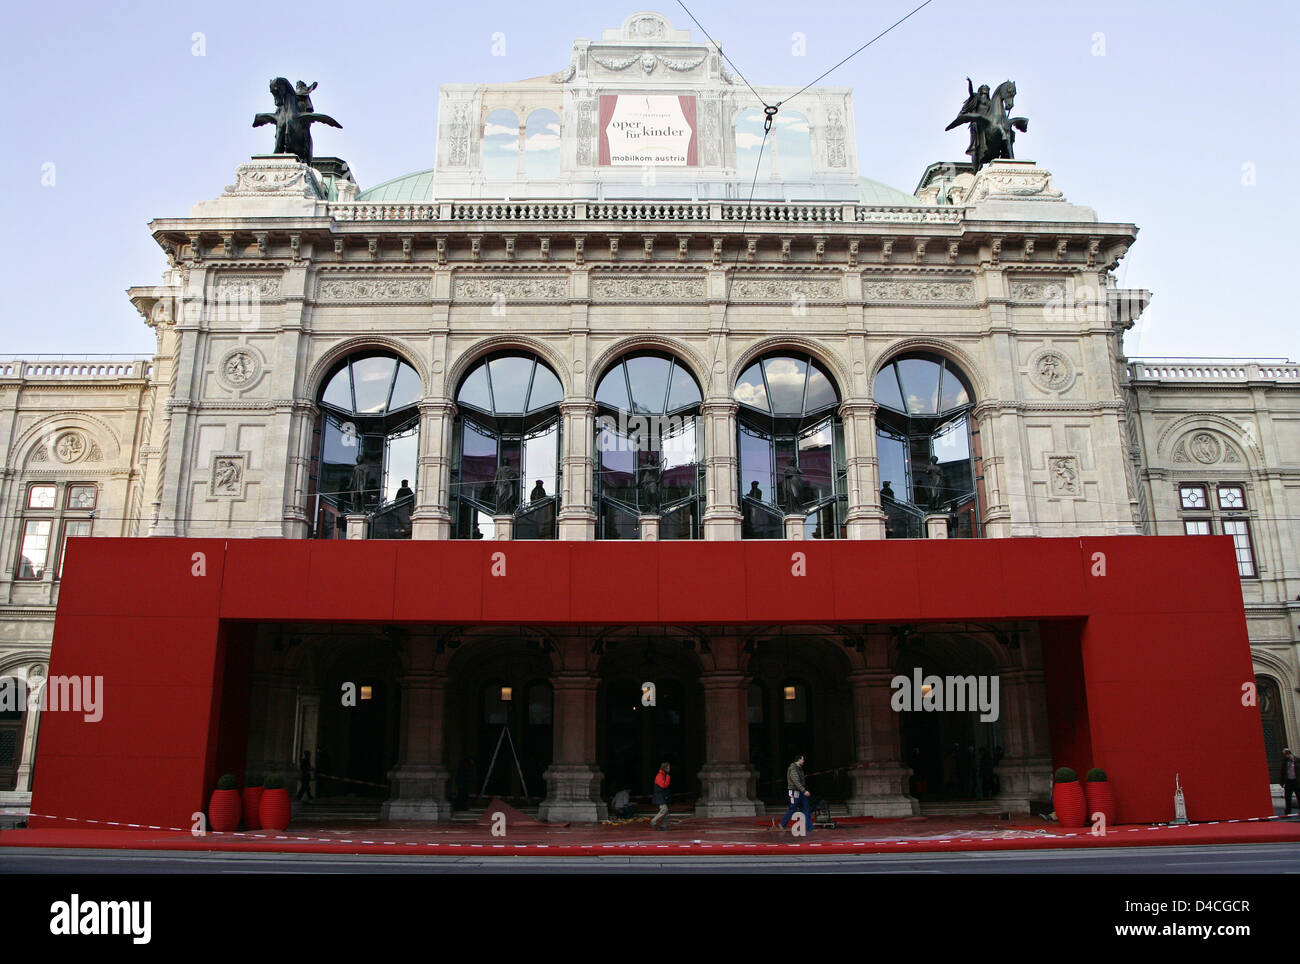 The preperations of the red carpet take place for the Vienna Opera Ball 2008 in Vienna, Austria, 31 January 2008. A red carpet is laid out for the first time at the traditional and highly sophisticated event taking place later the evening. Photo: ARNO BURGI Stock Photo